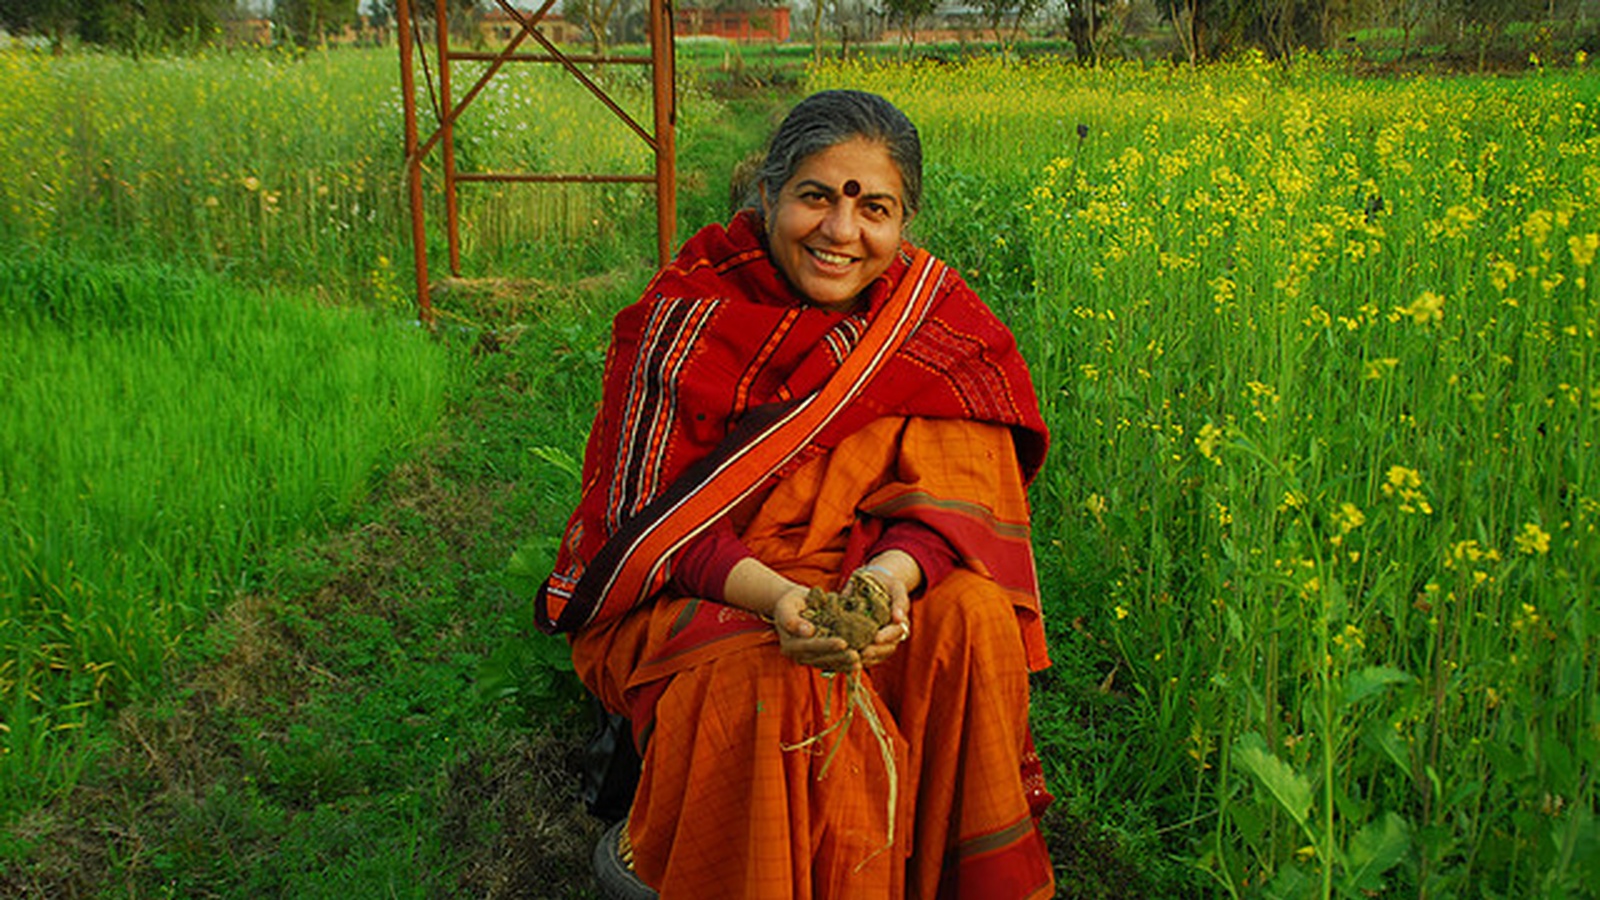 Dr Vandana Shiva Speaks Out For Mother Nature